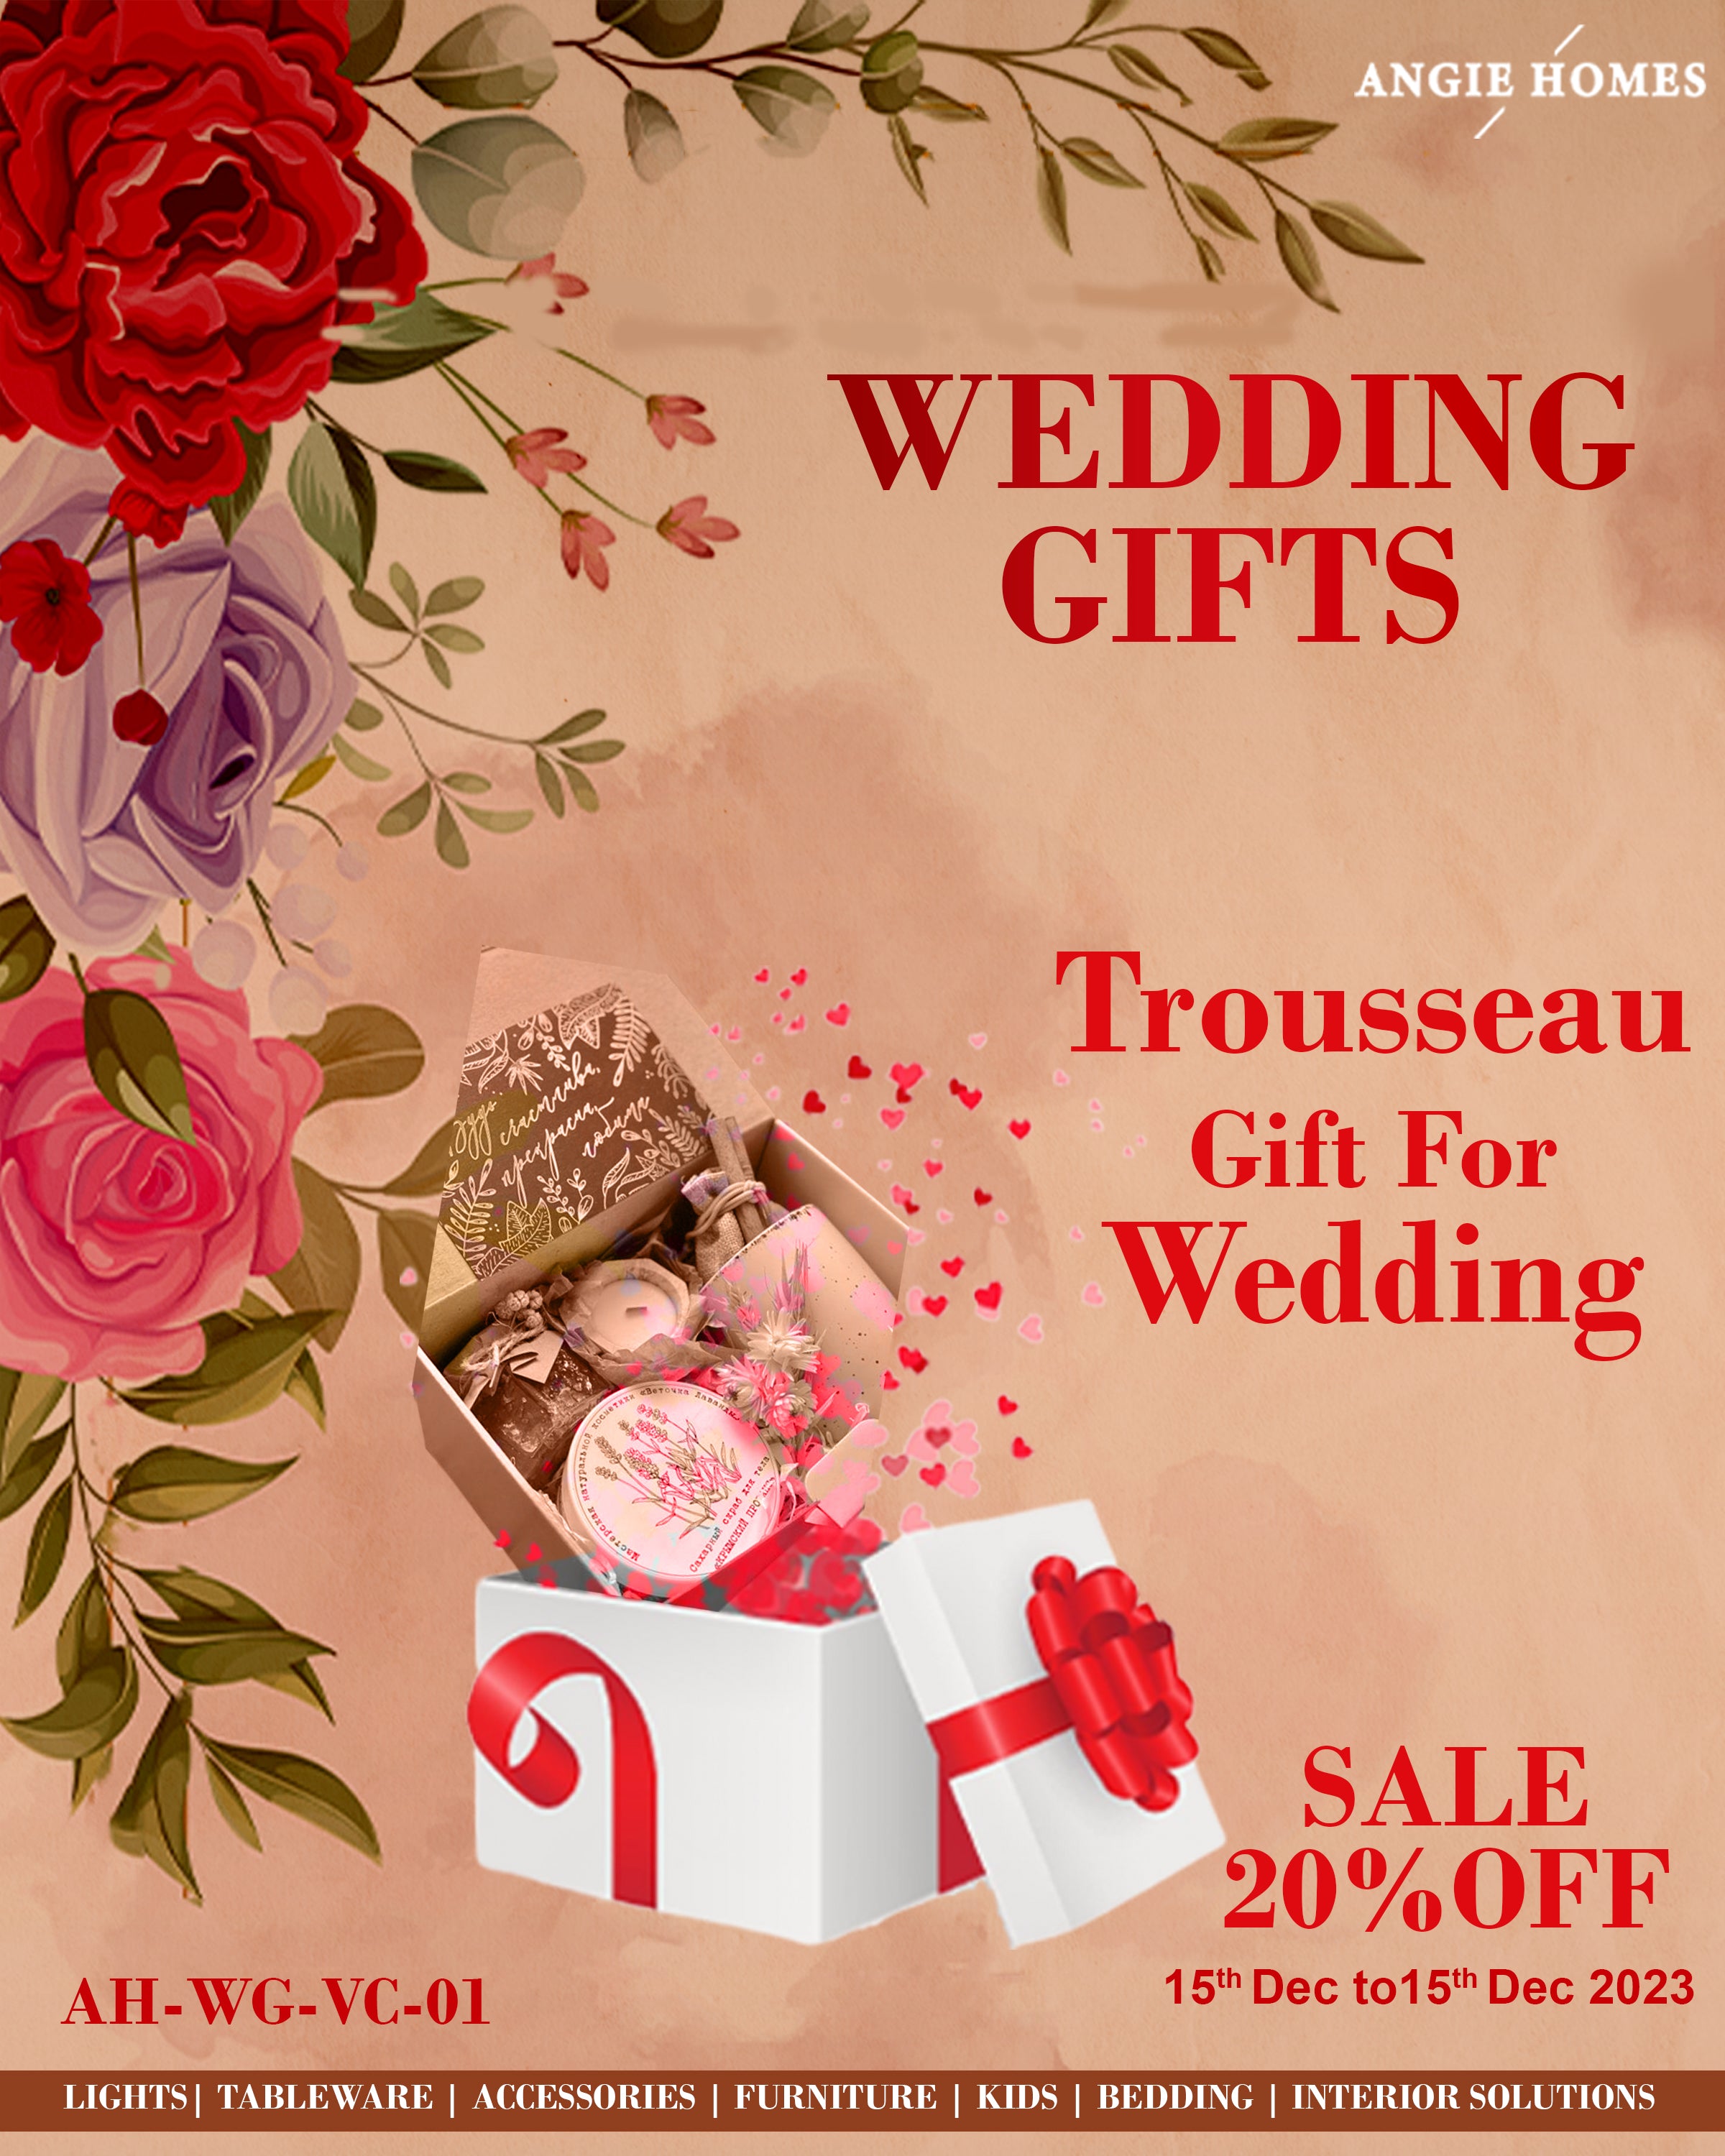 TROUSSEAU WEDDING GIFTS | MARRIAGE GIFT VOUCHER | FANCY GIFTTING ANGIE HOMES